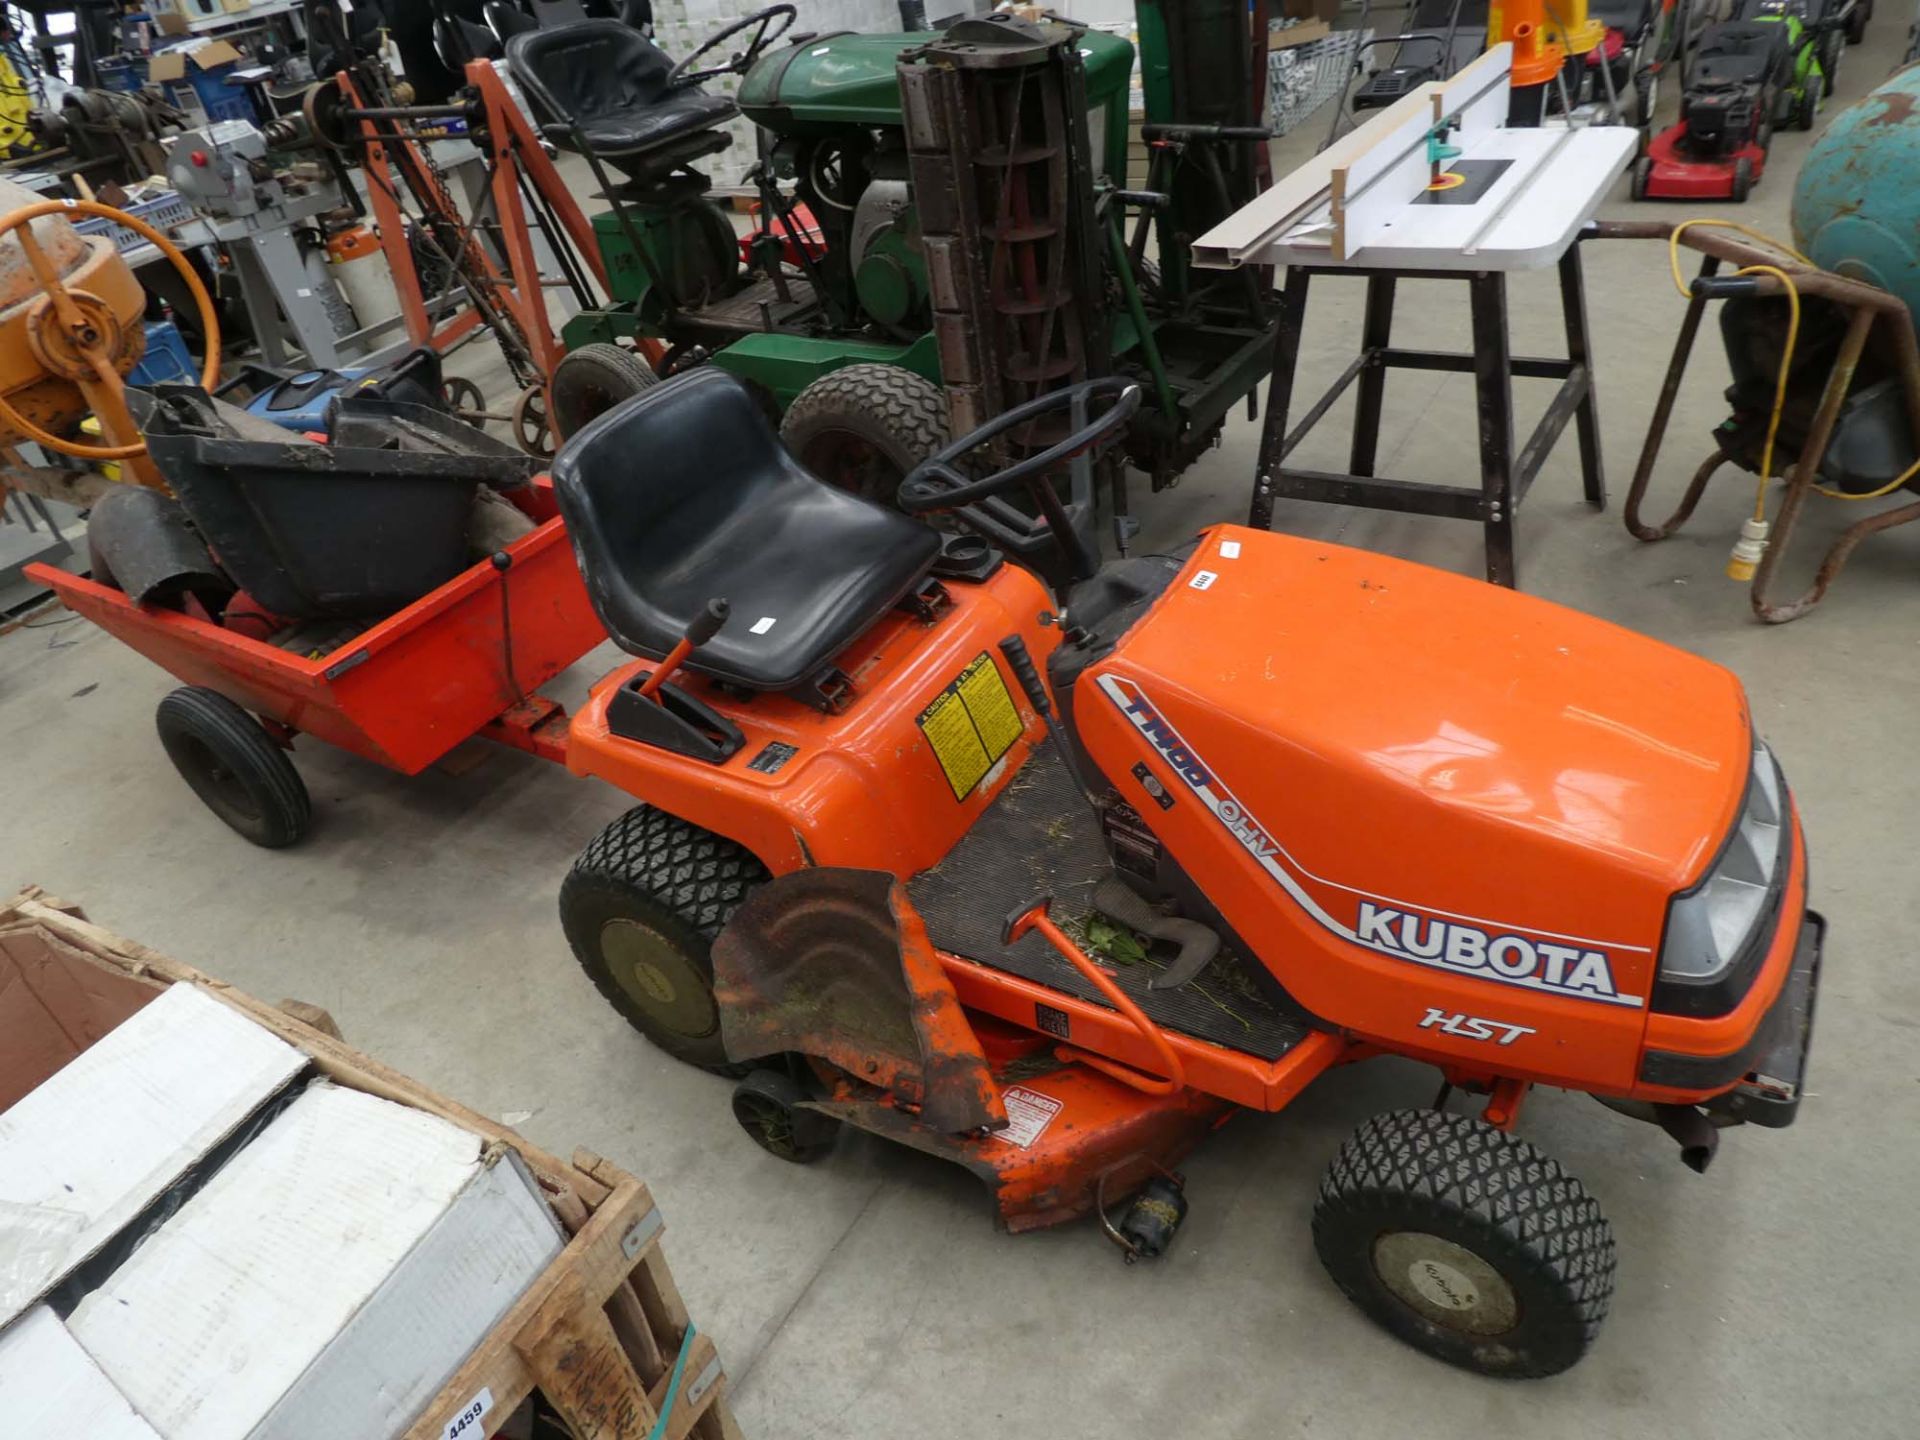 Kibota T1400 ride on lawnmower with trailer and attachment